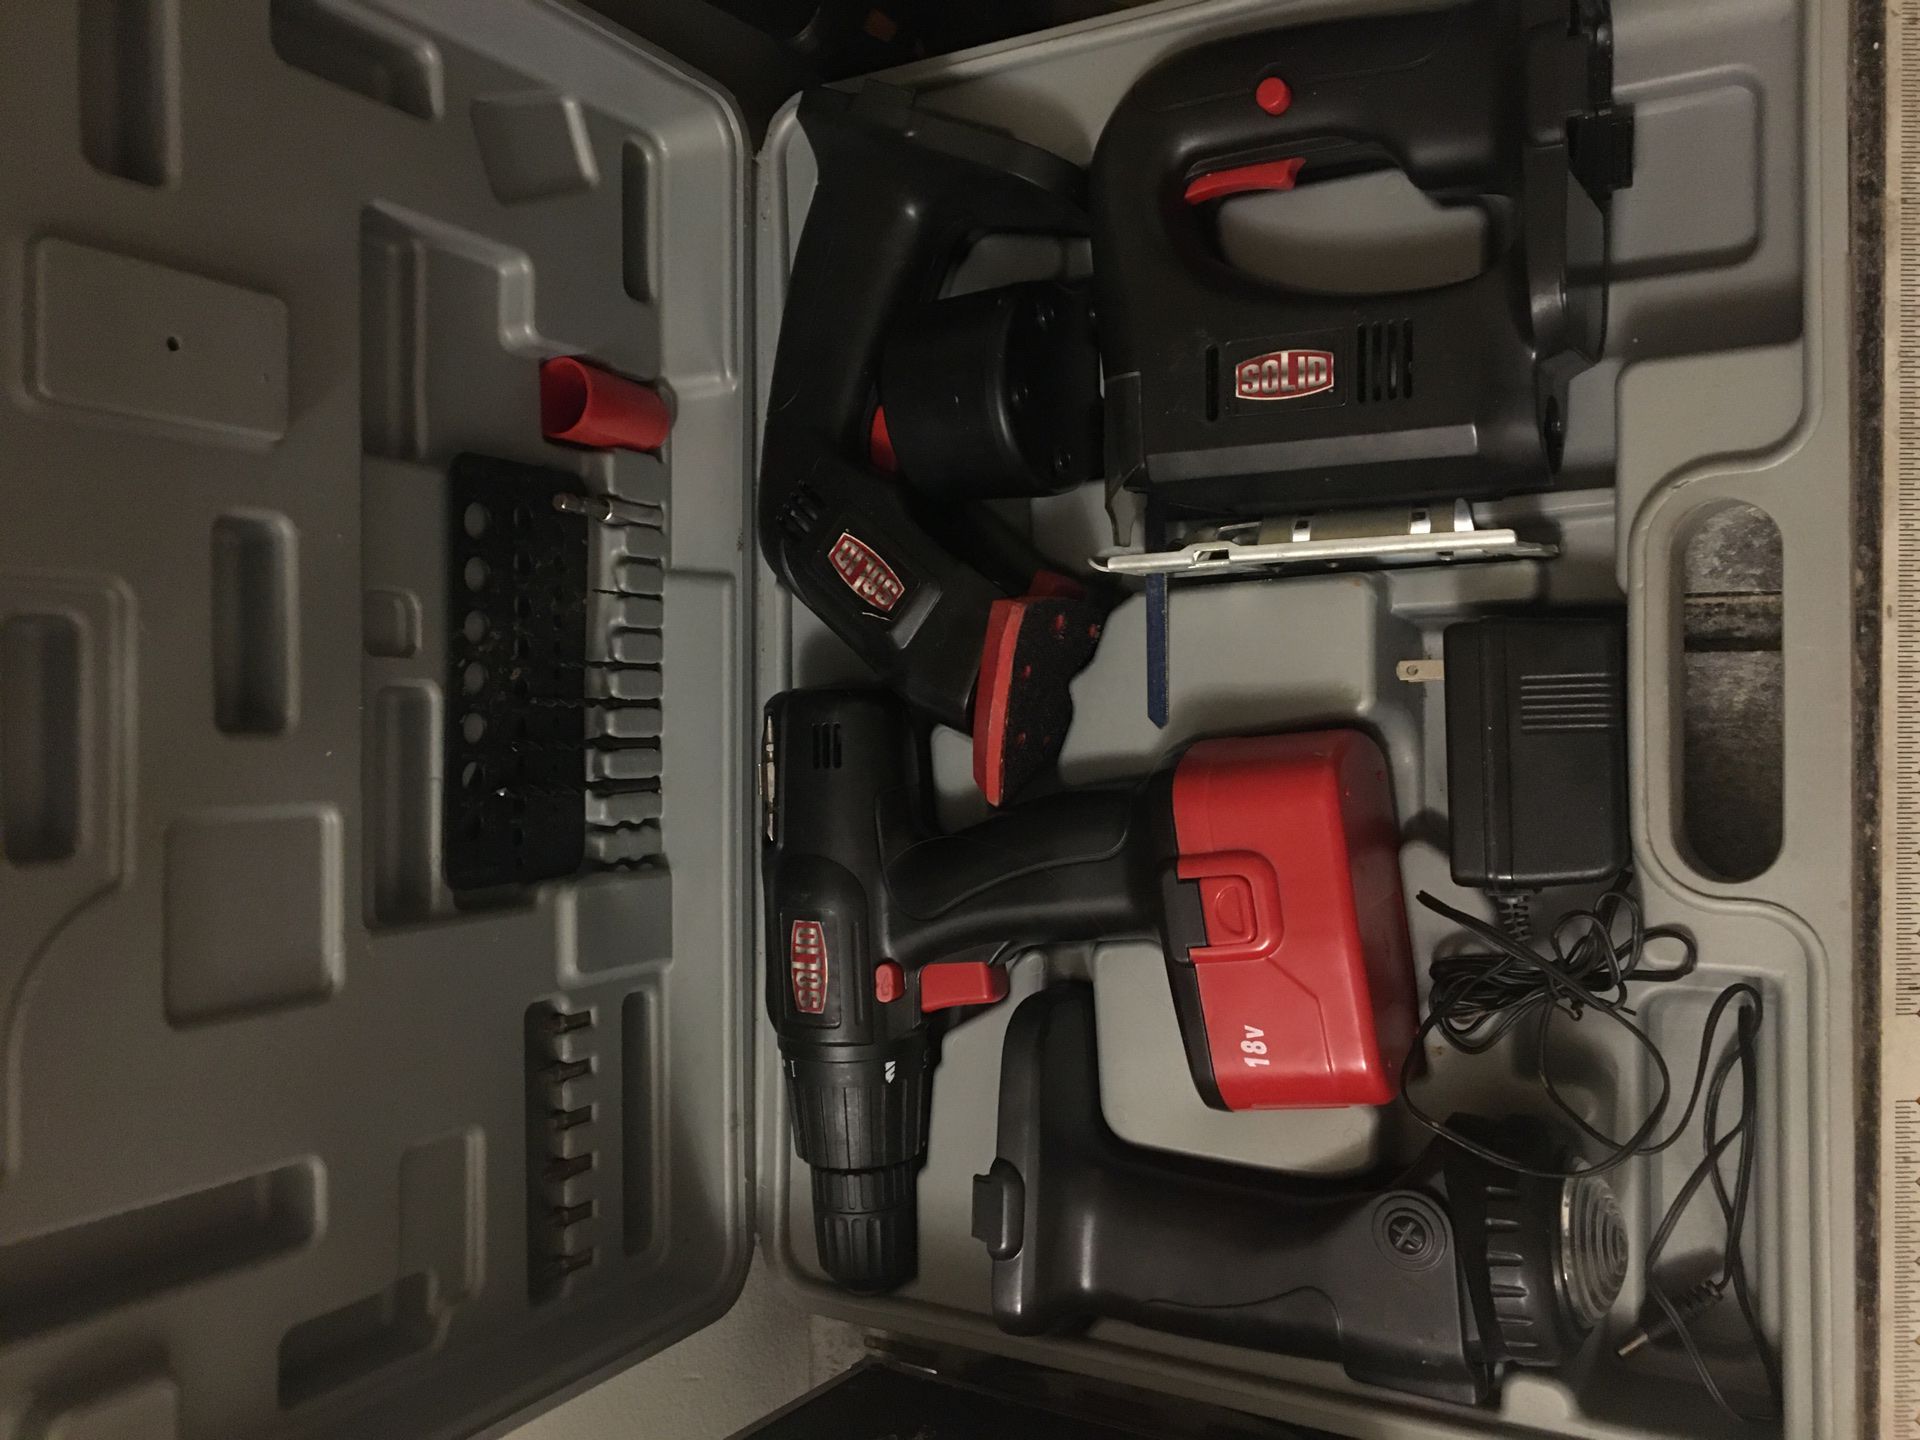 Brand SOLID .. Drill Tool Set